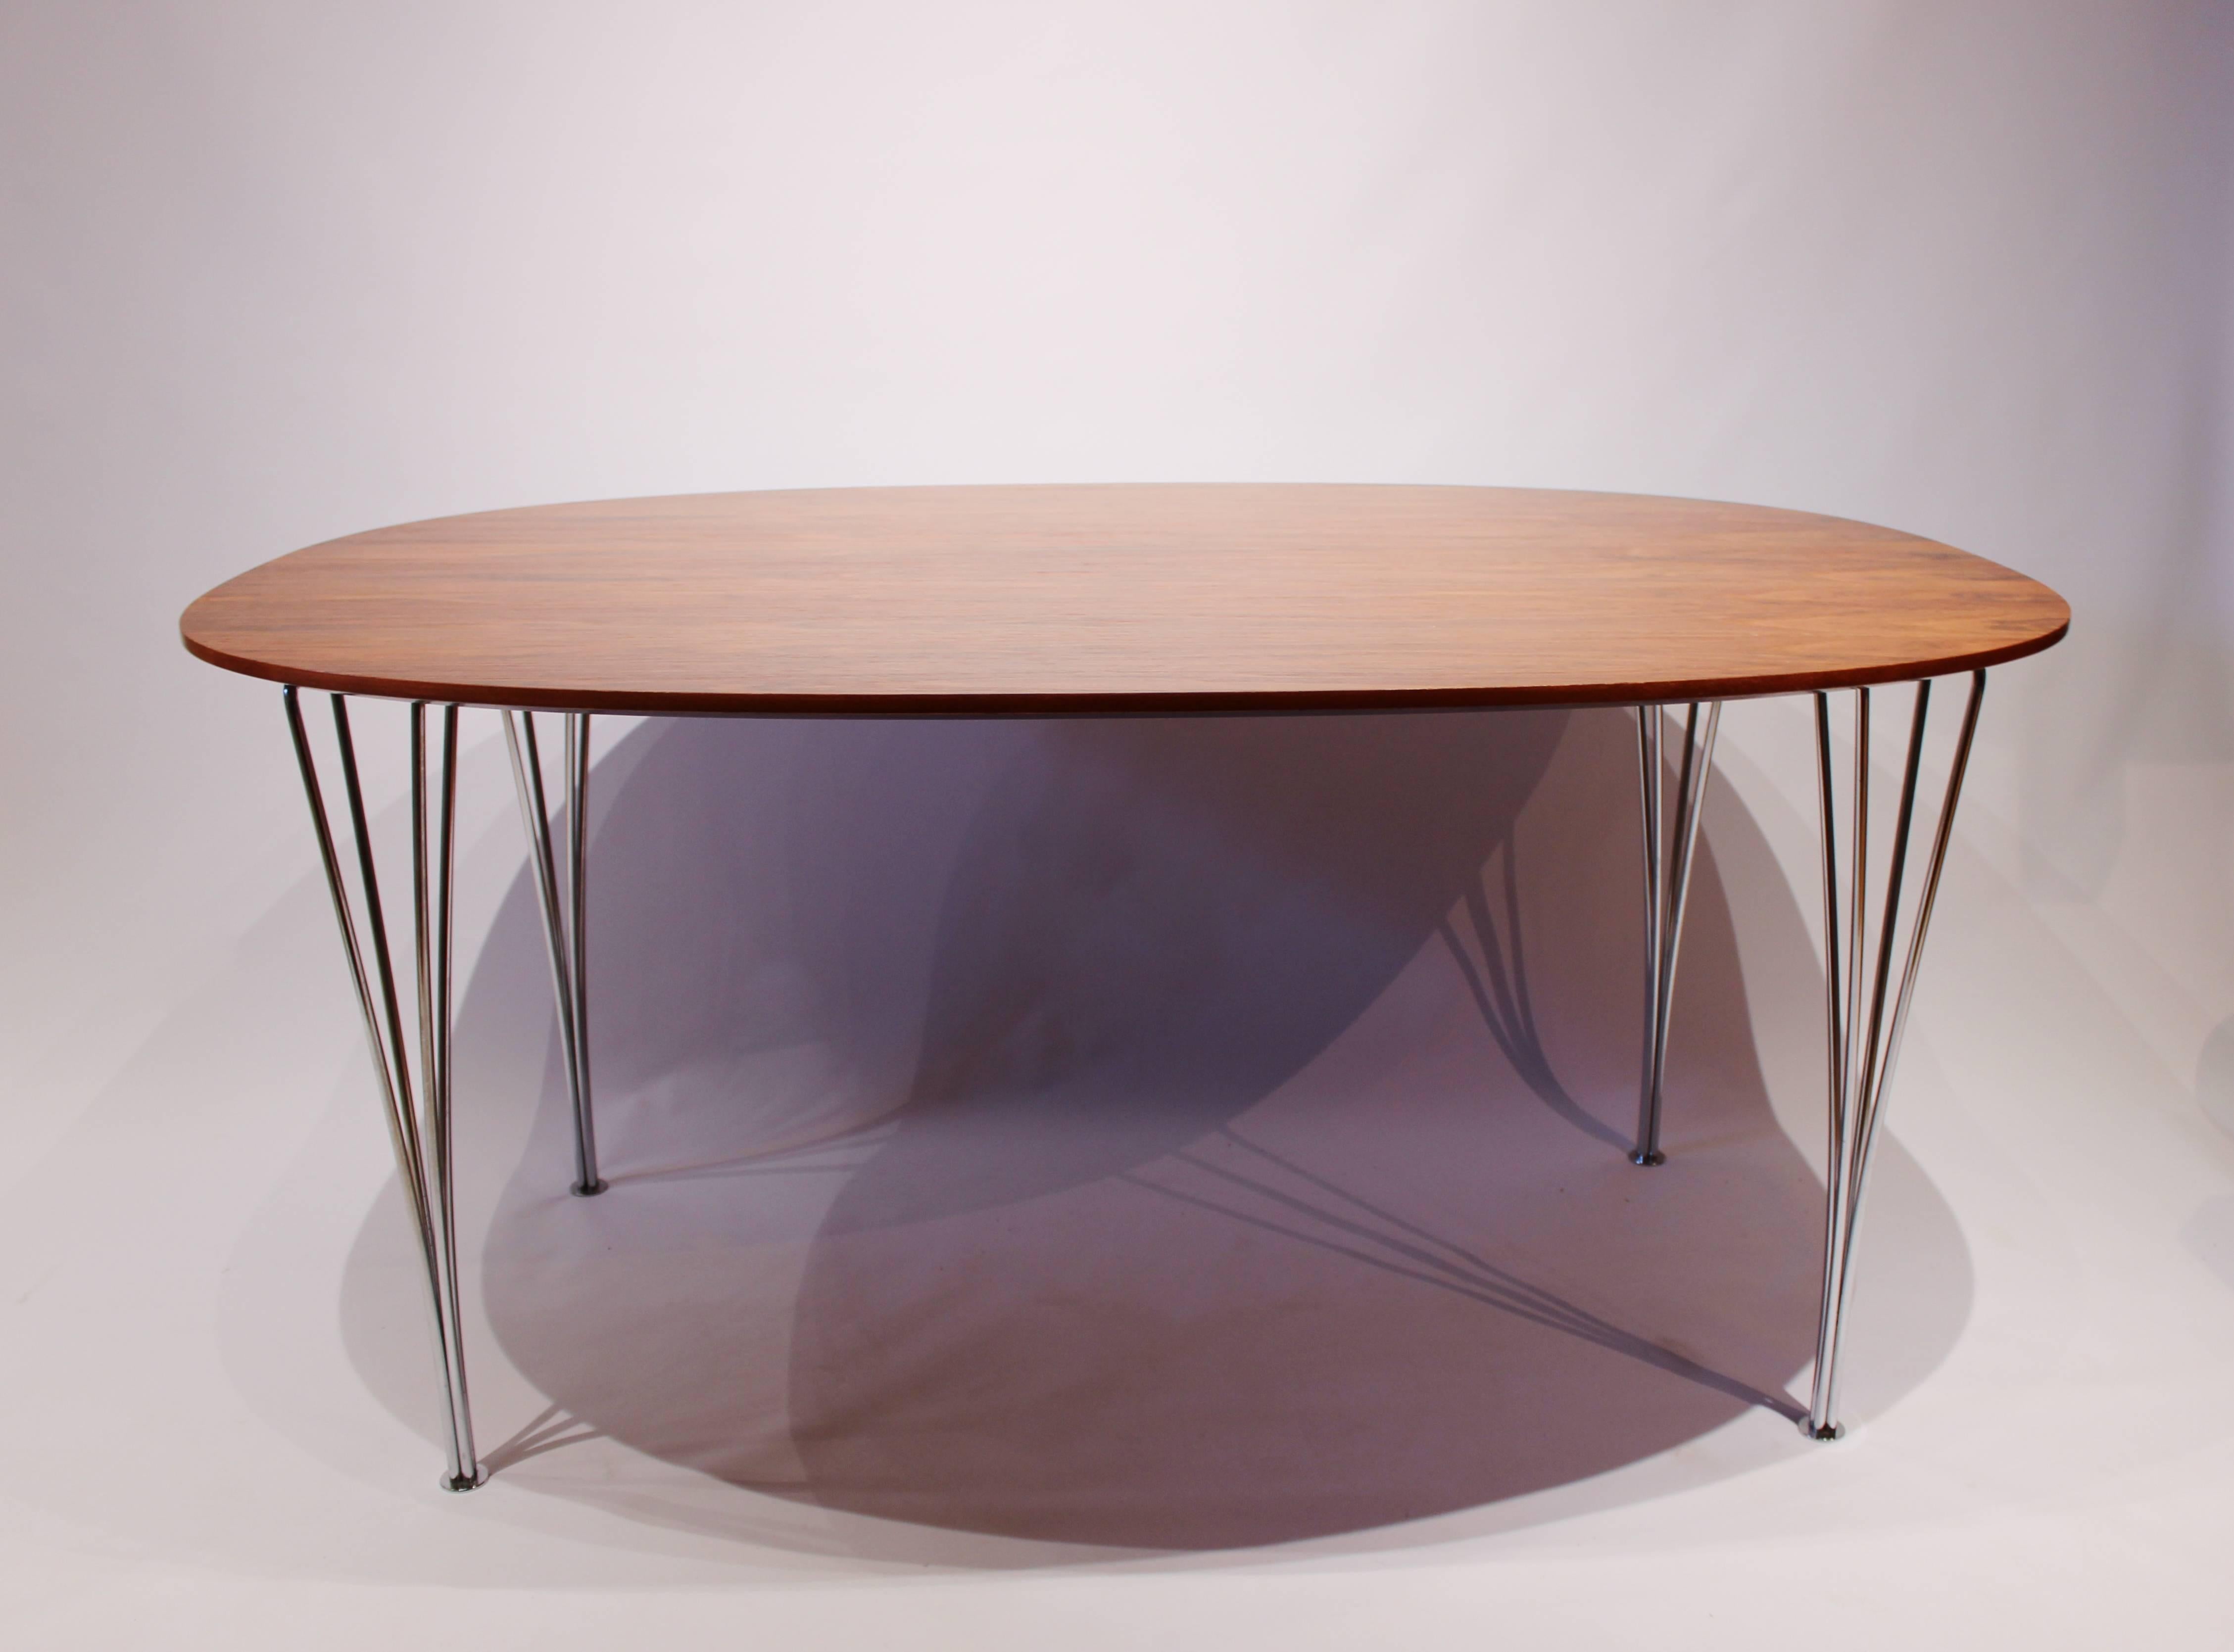 Super Ellipse table in rosewood designed by Piet Hein, Arne Jacobsen and Bruno Mathsson in 1968 and manufactured by Fritz Hansen in 1983. The table is in great vintage condition and with legs of chrome.